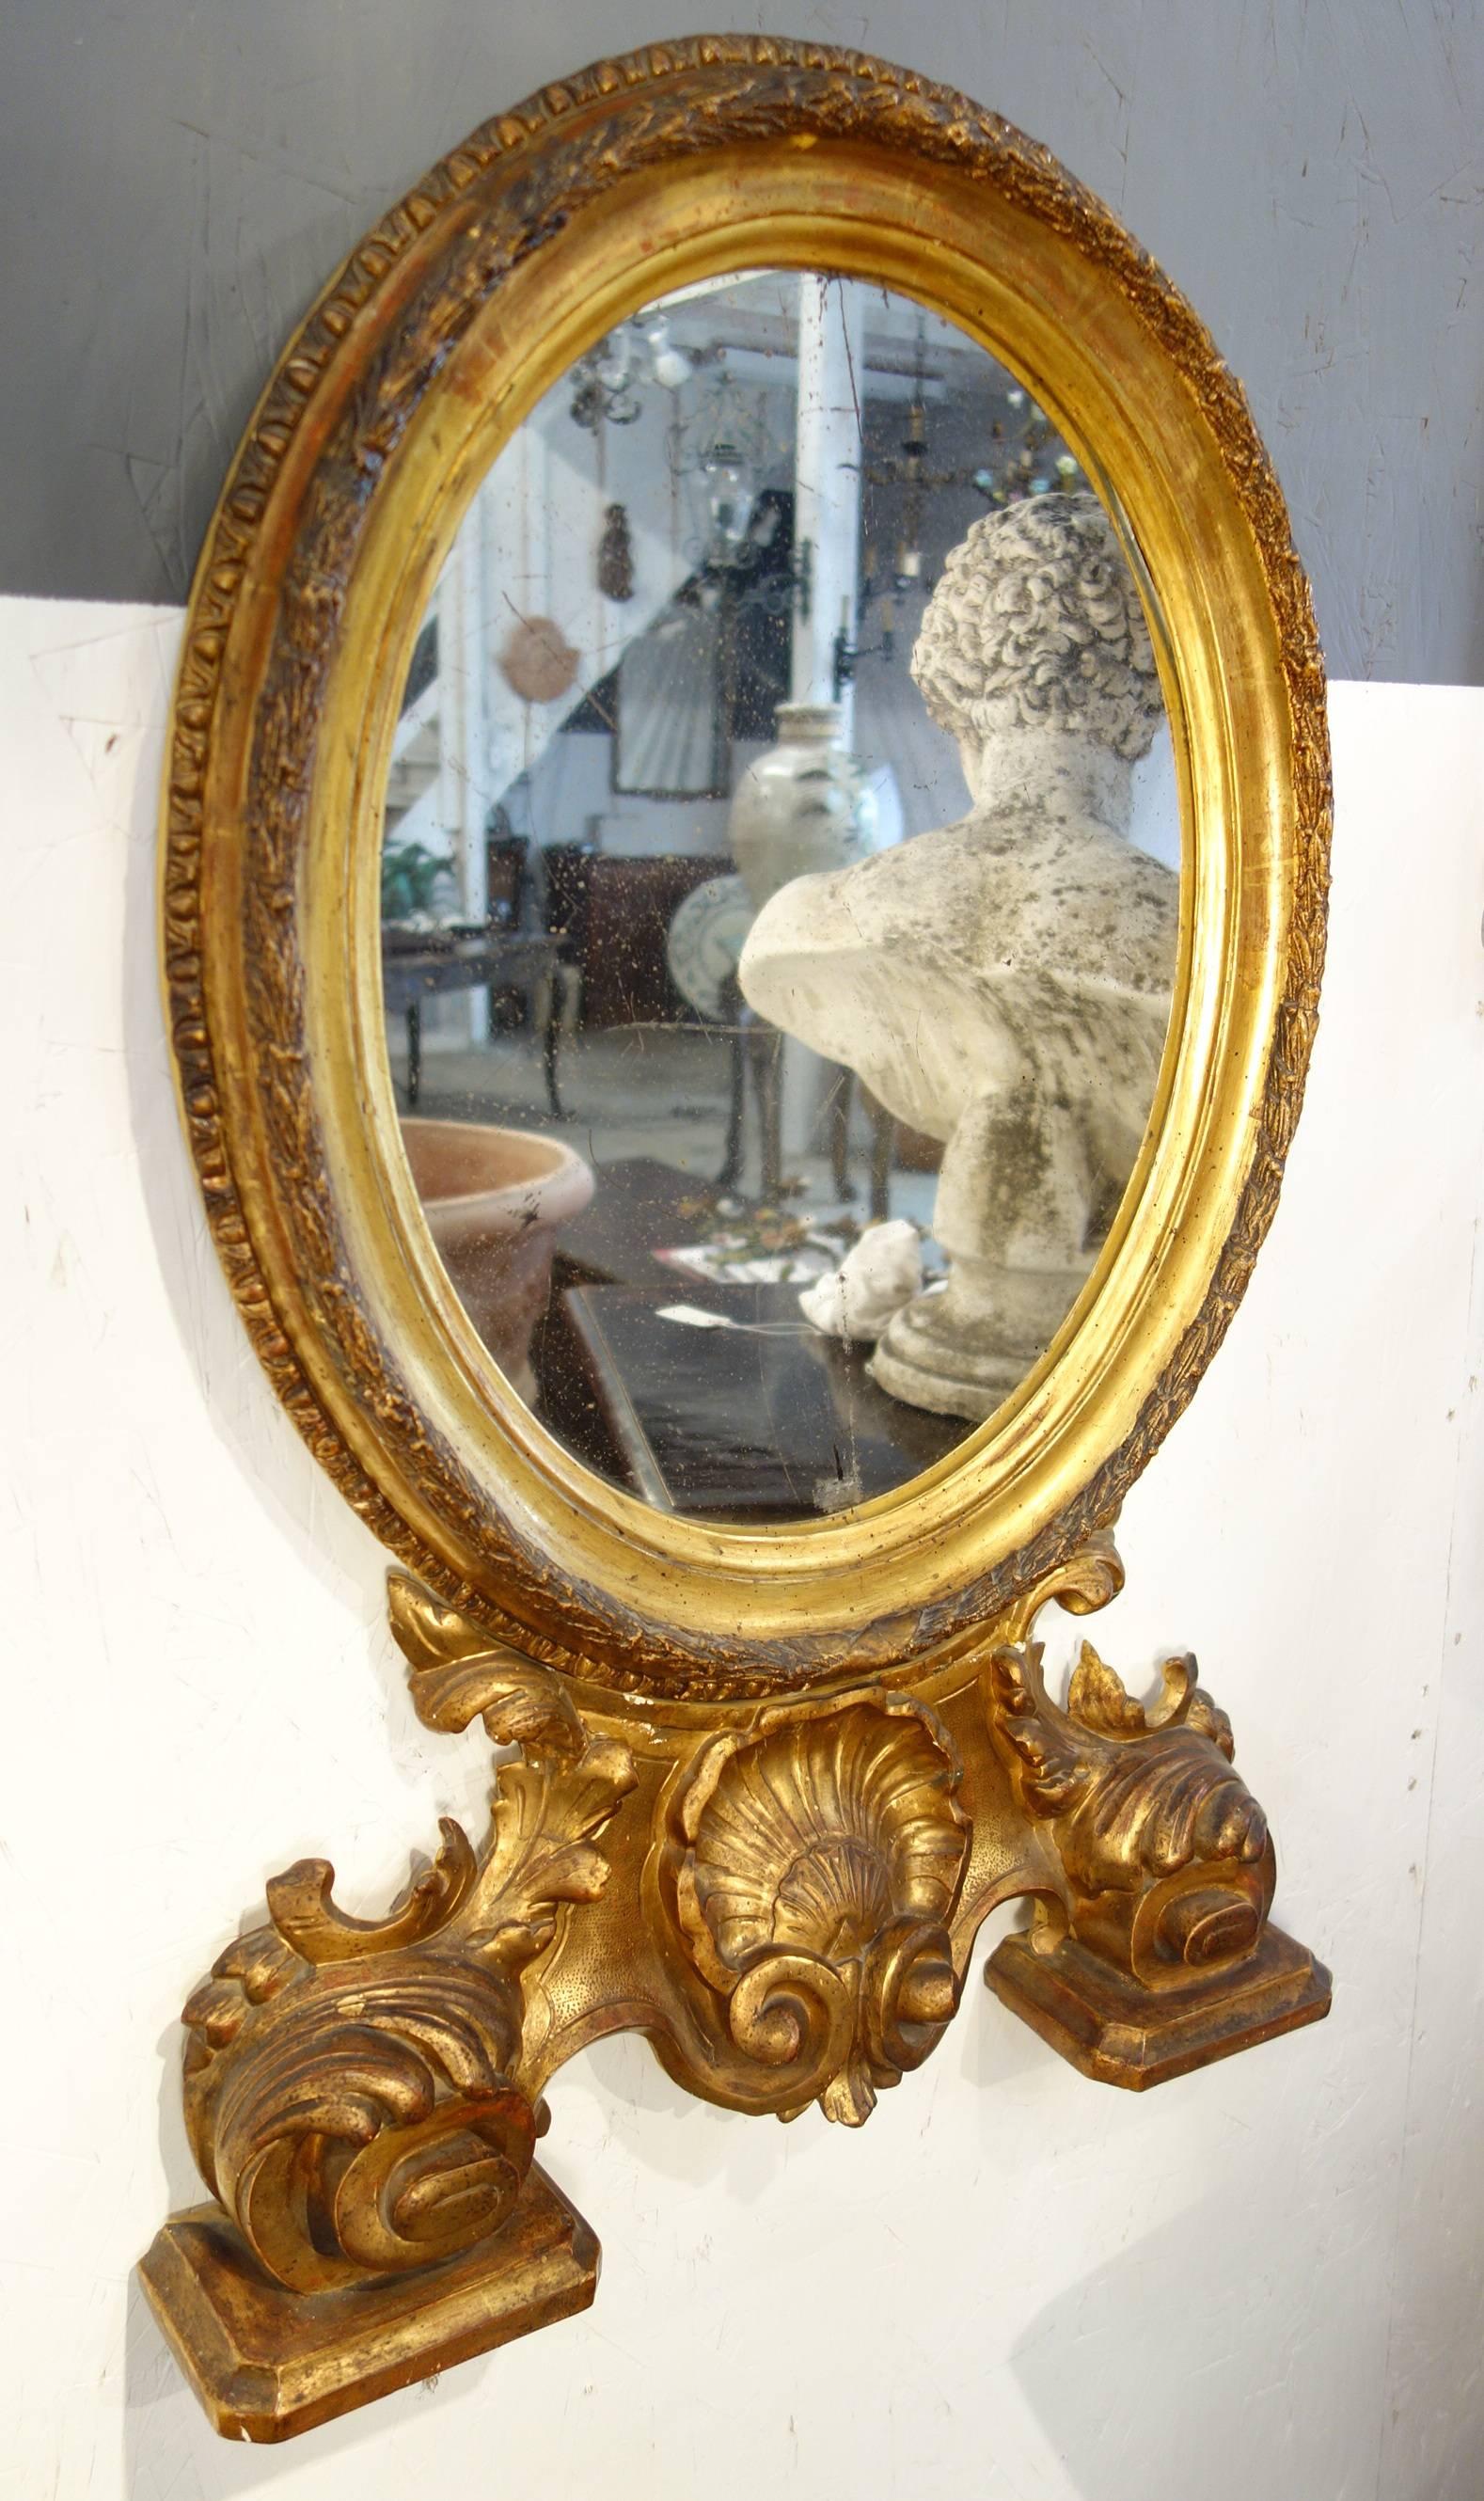 Extravagant hand-carved wood, gold gilded, burnished, moulded frame with Baroque style ornate base of leaves and central shell decoration. Original mercury mirror.

Measures: 32" H x 20" W x 4" D.